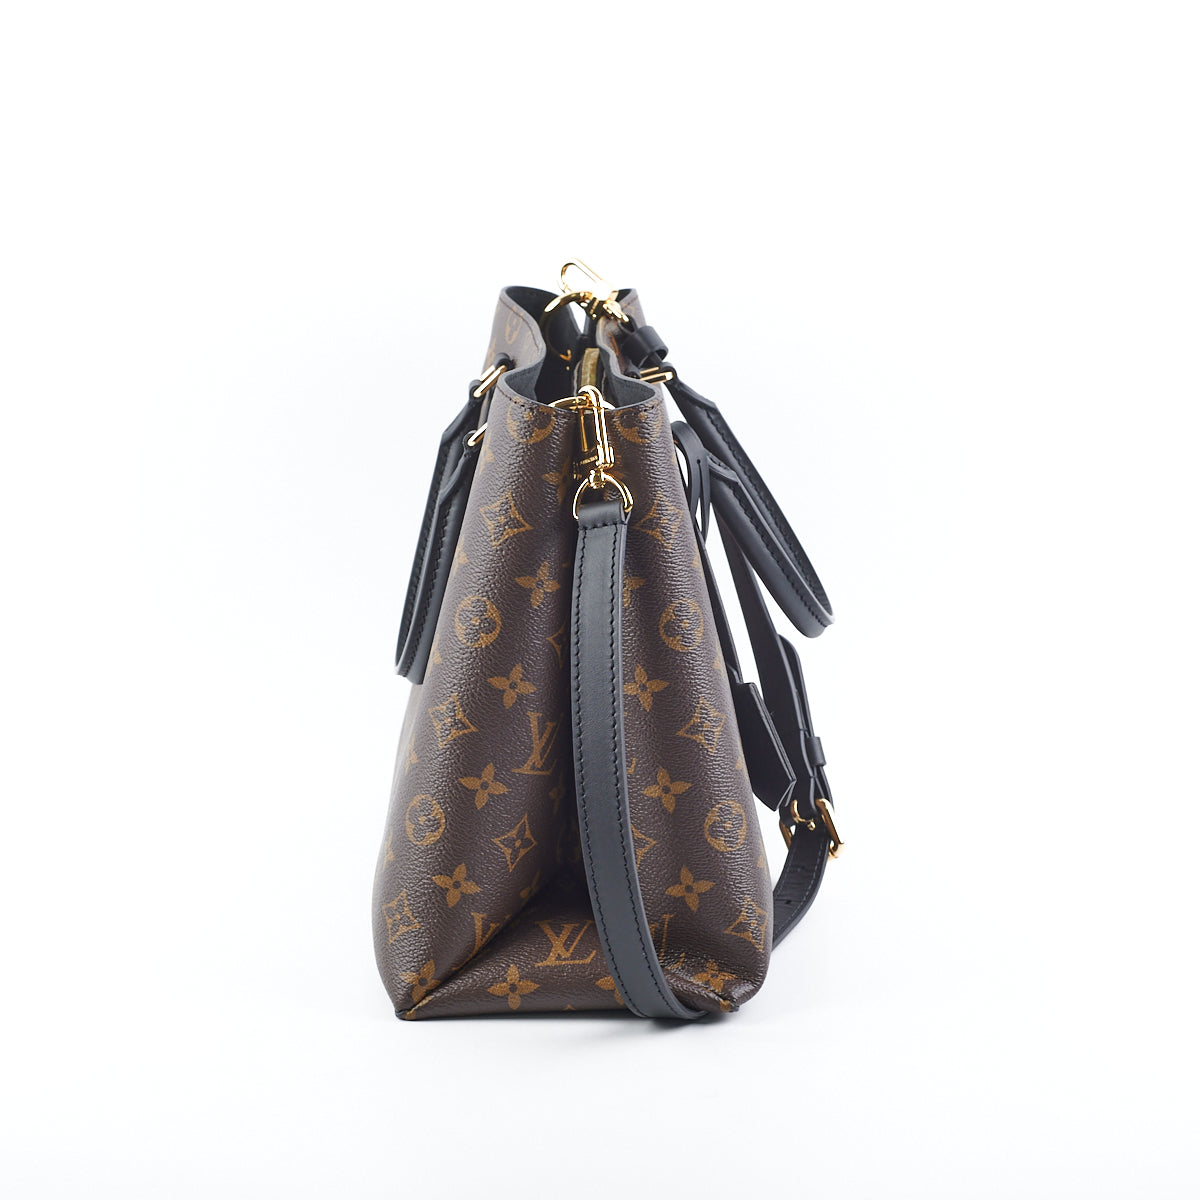 Louis Vuitton Floral Tote Bags & Handbags for Women, Authenticity  Guaranteed